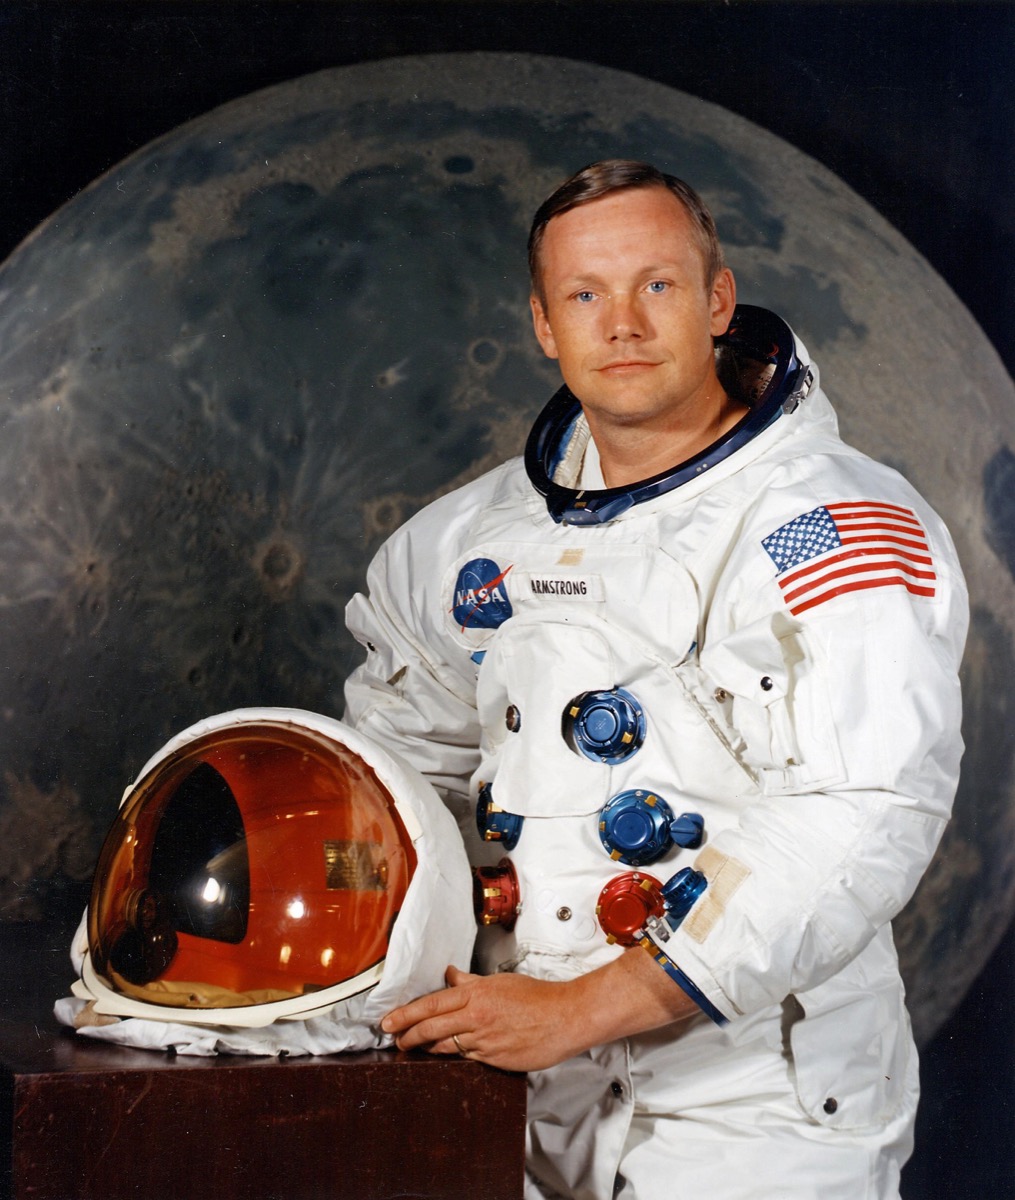 E4JPW1 Neil Armstrong, portrait of Apollo 11 Commander Neil A. Armstrong. Image shot 1969. Exact date unknown.